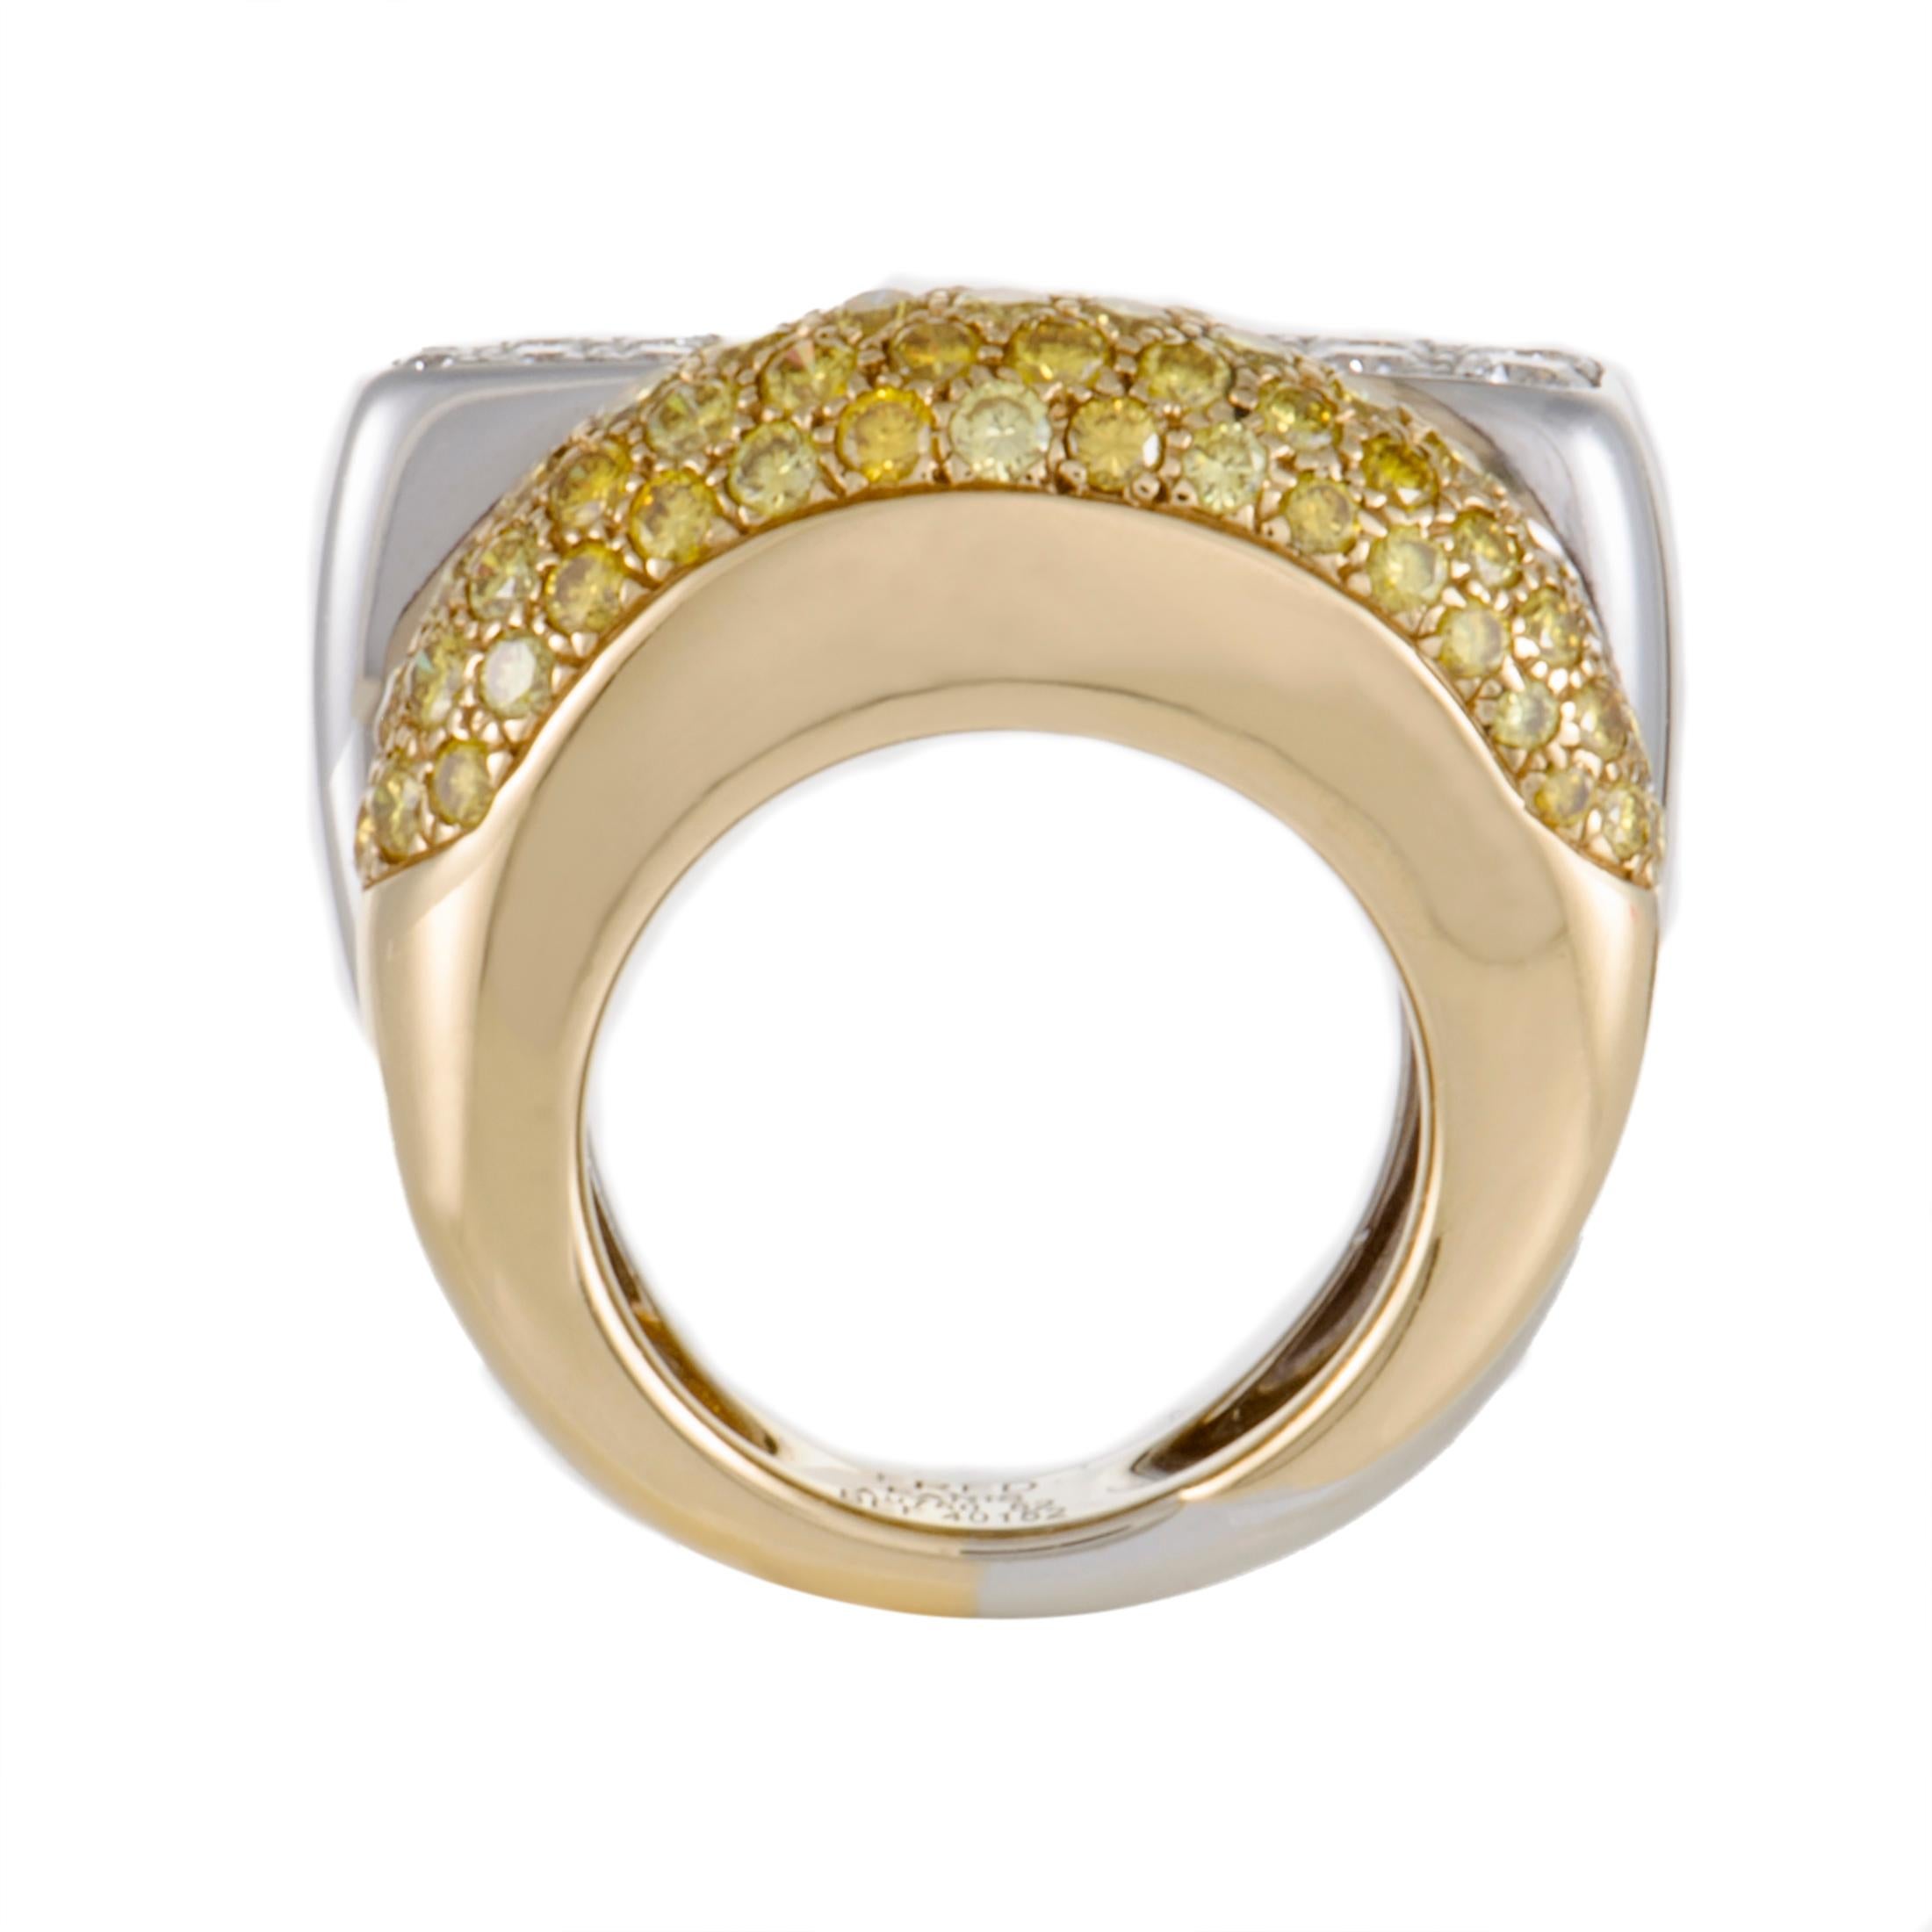 A fabulous contrast of colors and shapes produces astonishing allure in this exceptional ring from Fred of Paris which is made of shimmering 18K white gold and radiant 18K yellow gold, adorned respectively with white diamonds totaling 1.10 carats